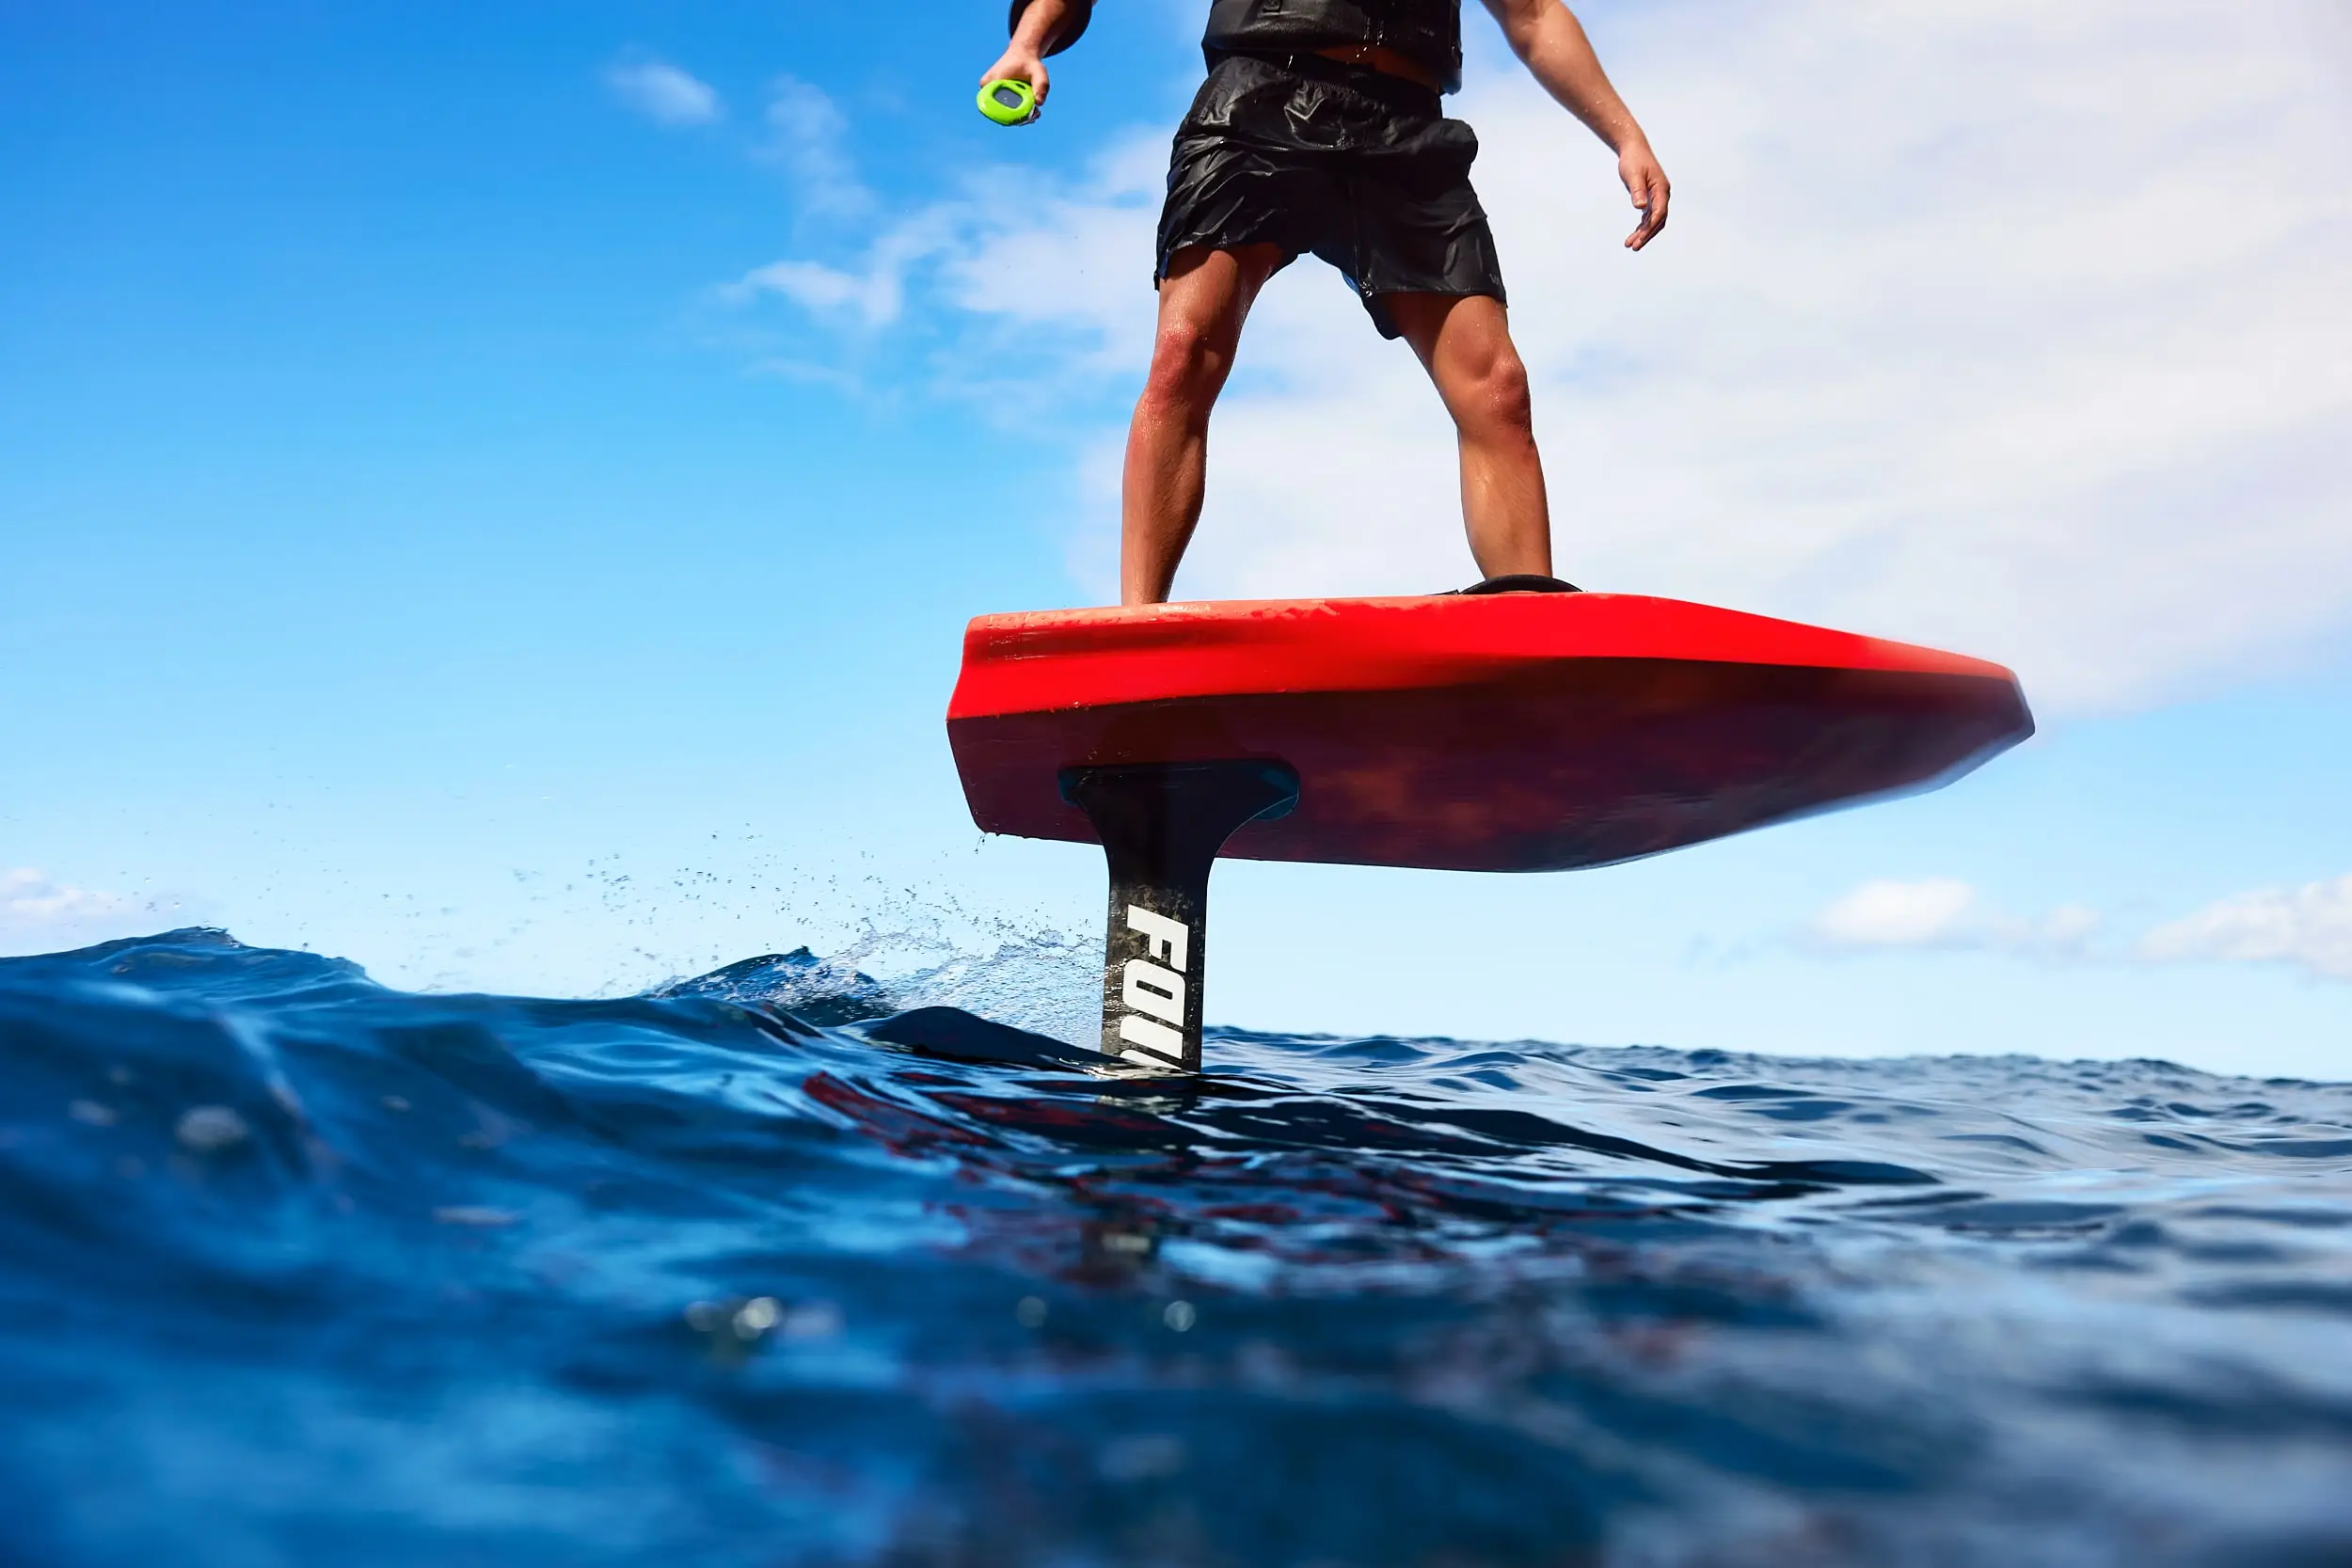 Waist-down shot of a male eFoil rider on a fuego-colored FOIL board. The board is carving through the water with clear blue skies in the background. 